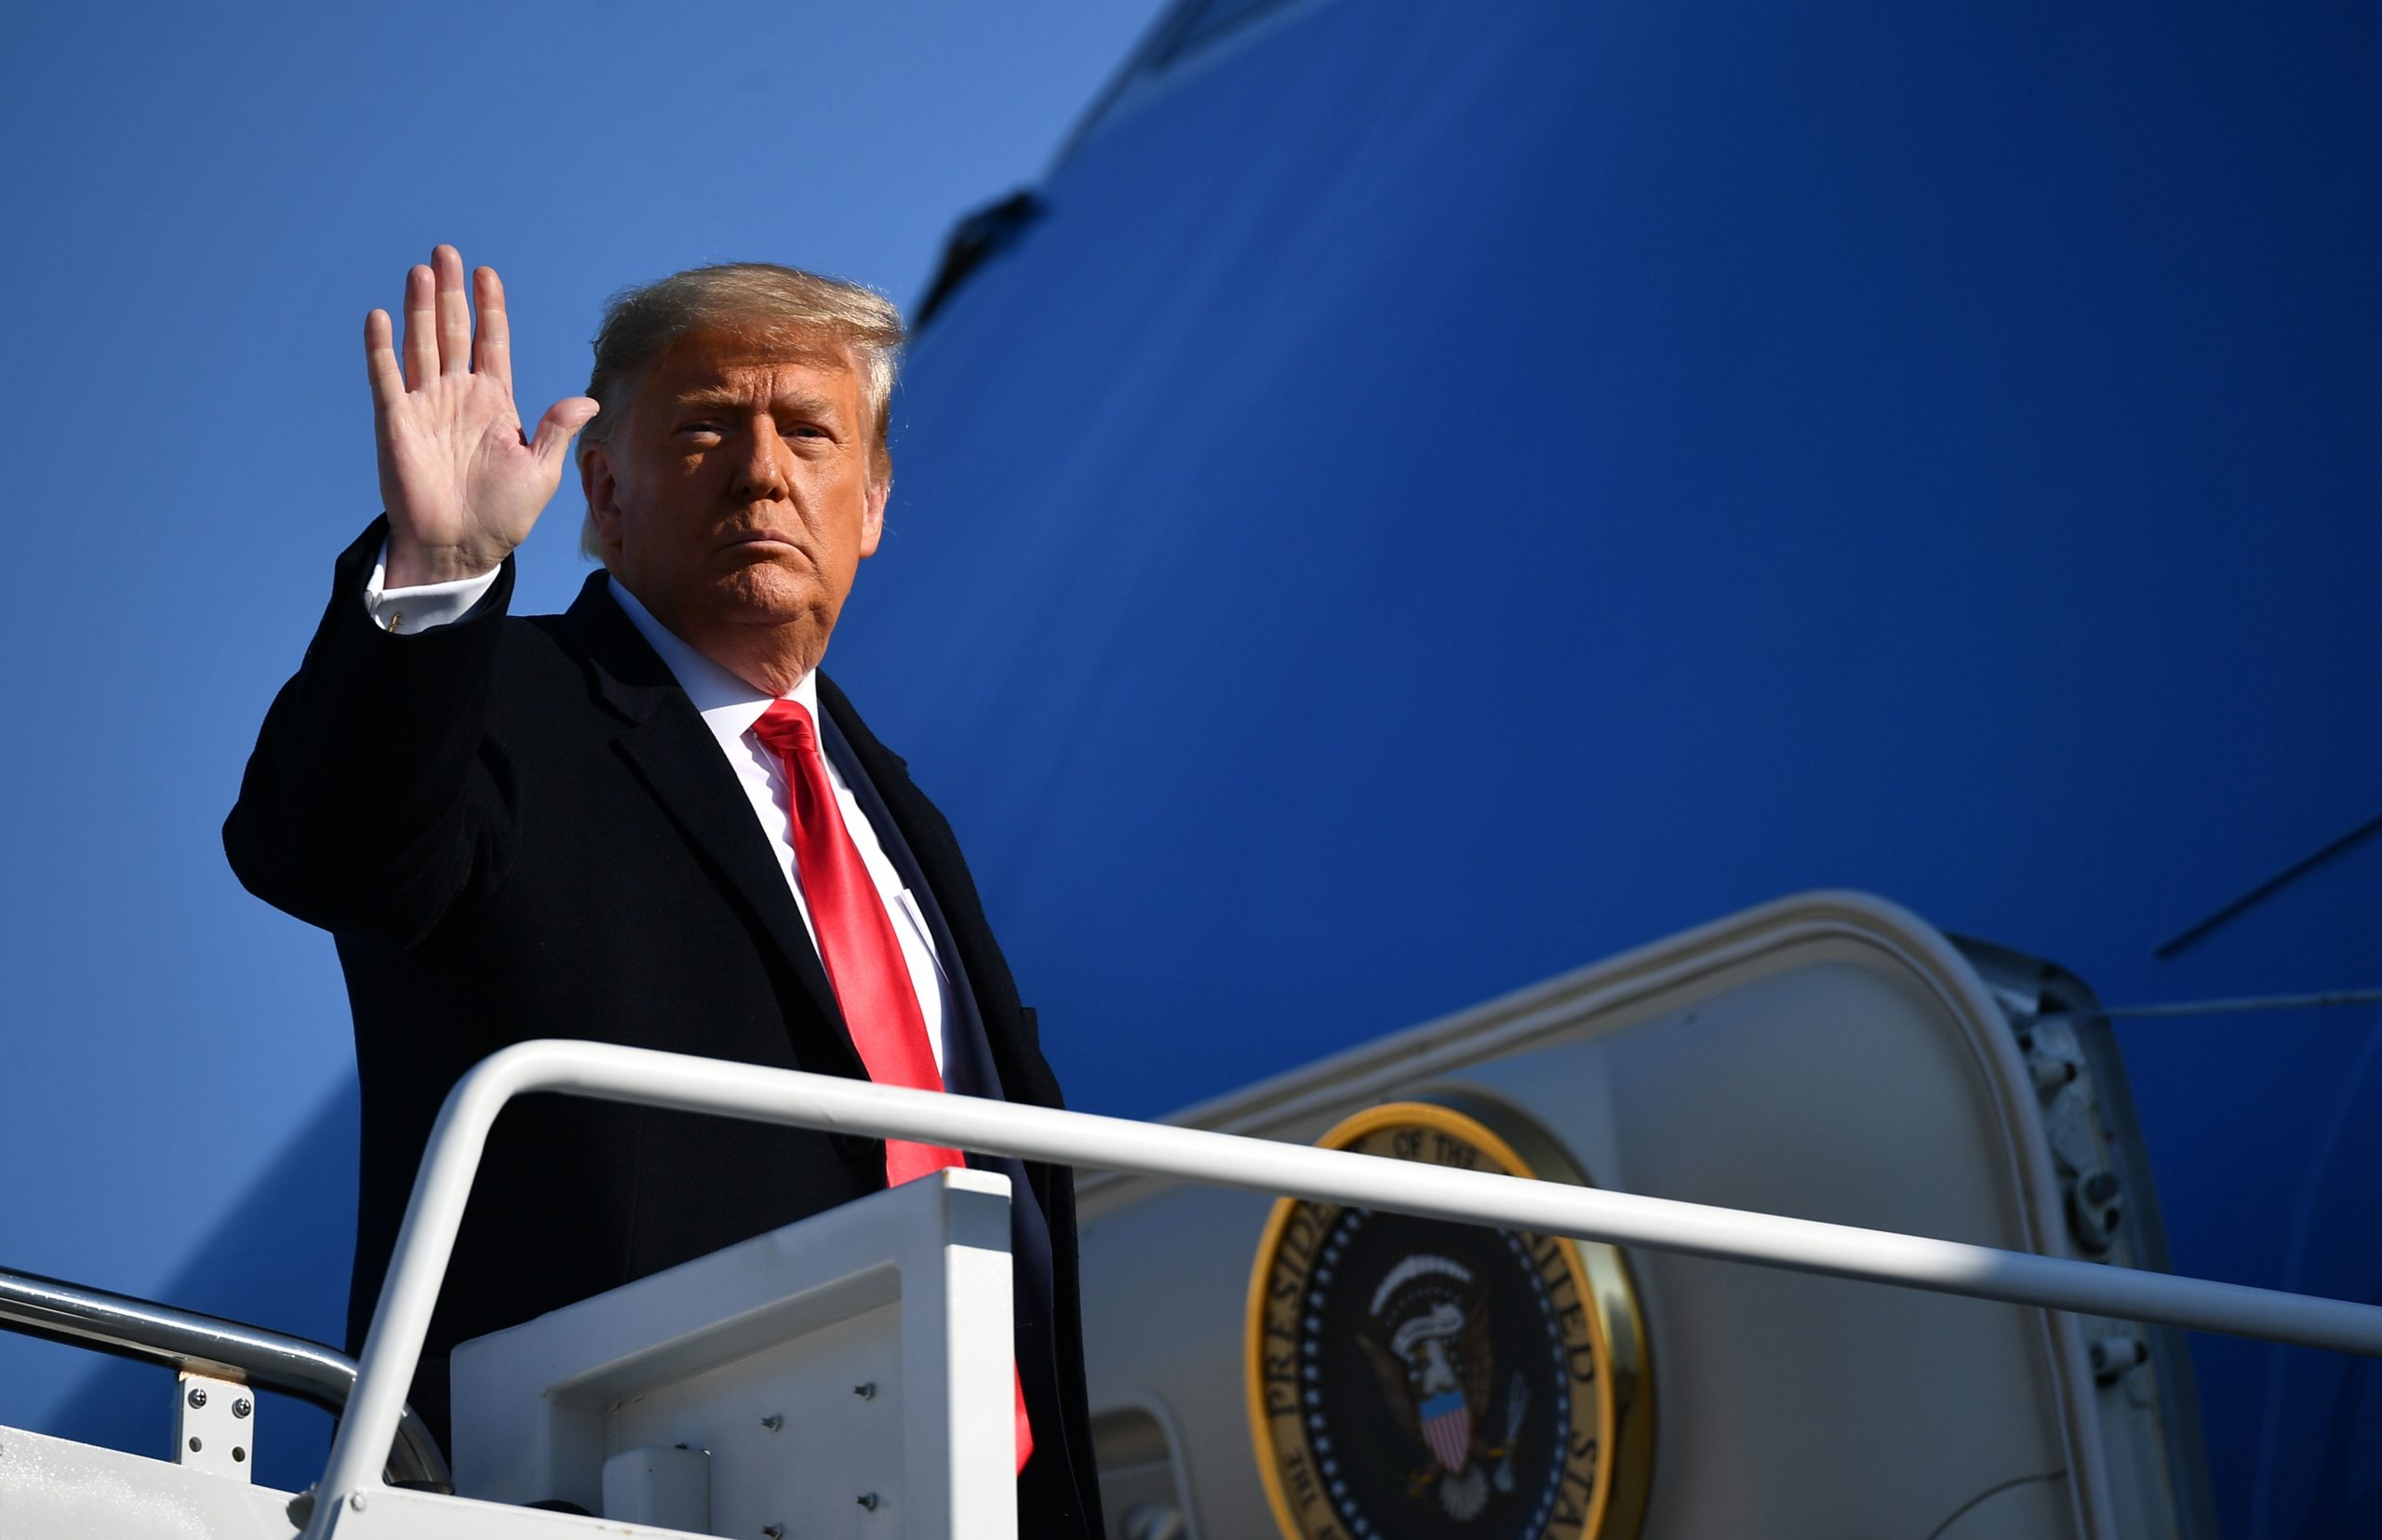 US President Donald Trump waves to the media as he makes his way to board Air Force One before departing from Andrews Air Force Base in Maryland on January 12, 2021. - Trump is traveling to Texas to review his border wall project. (Photo by MANDEL NGAN/AFP via Getty Images)